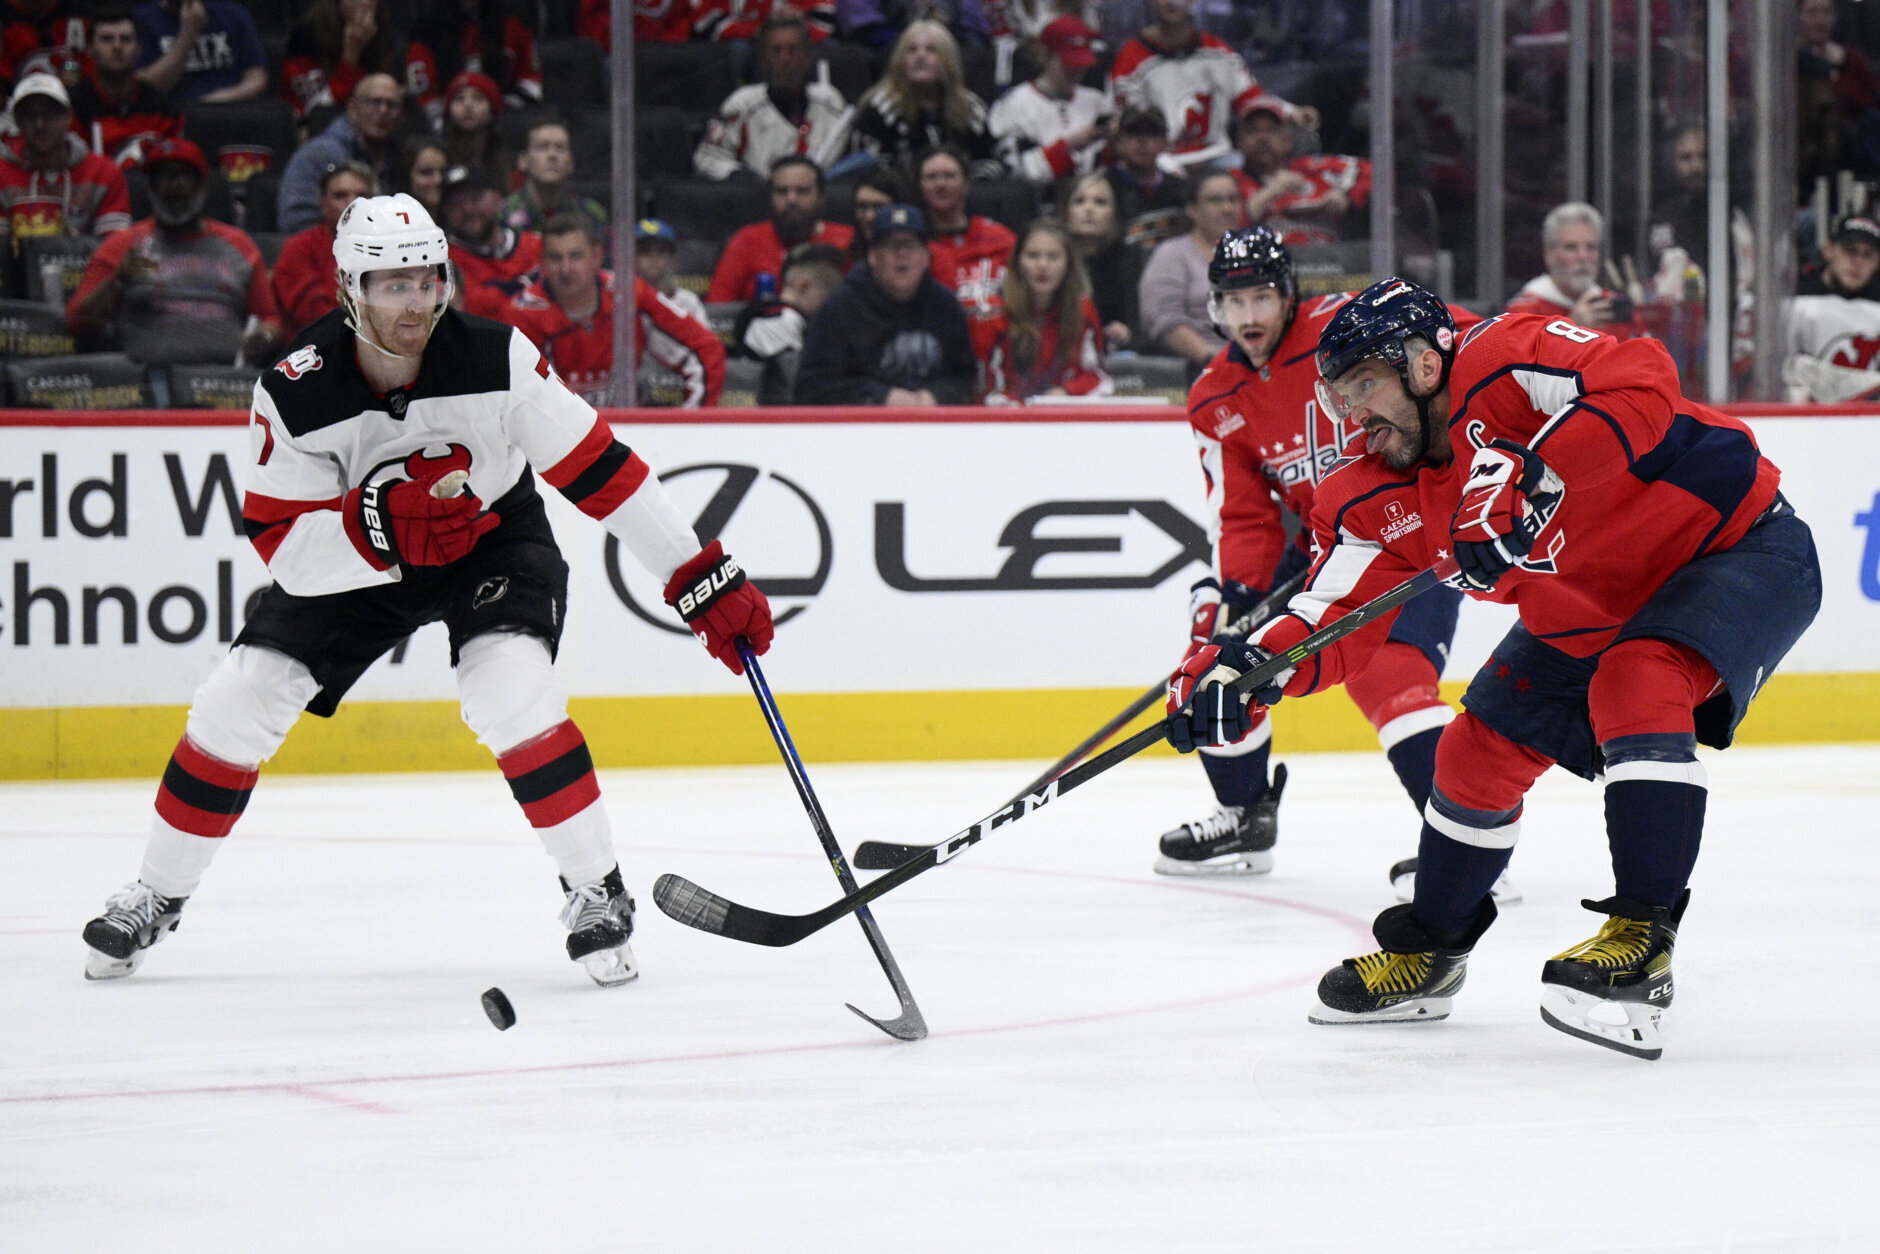 New Jersey Devils Will Win First Round Series Despite Game 1 Loss